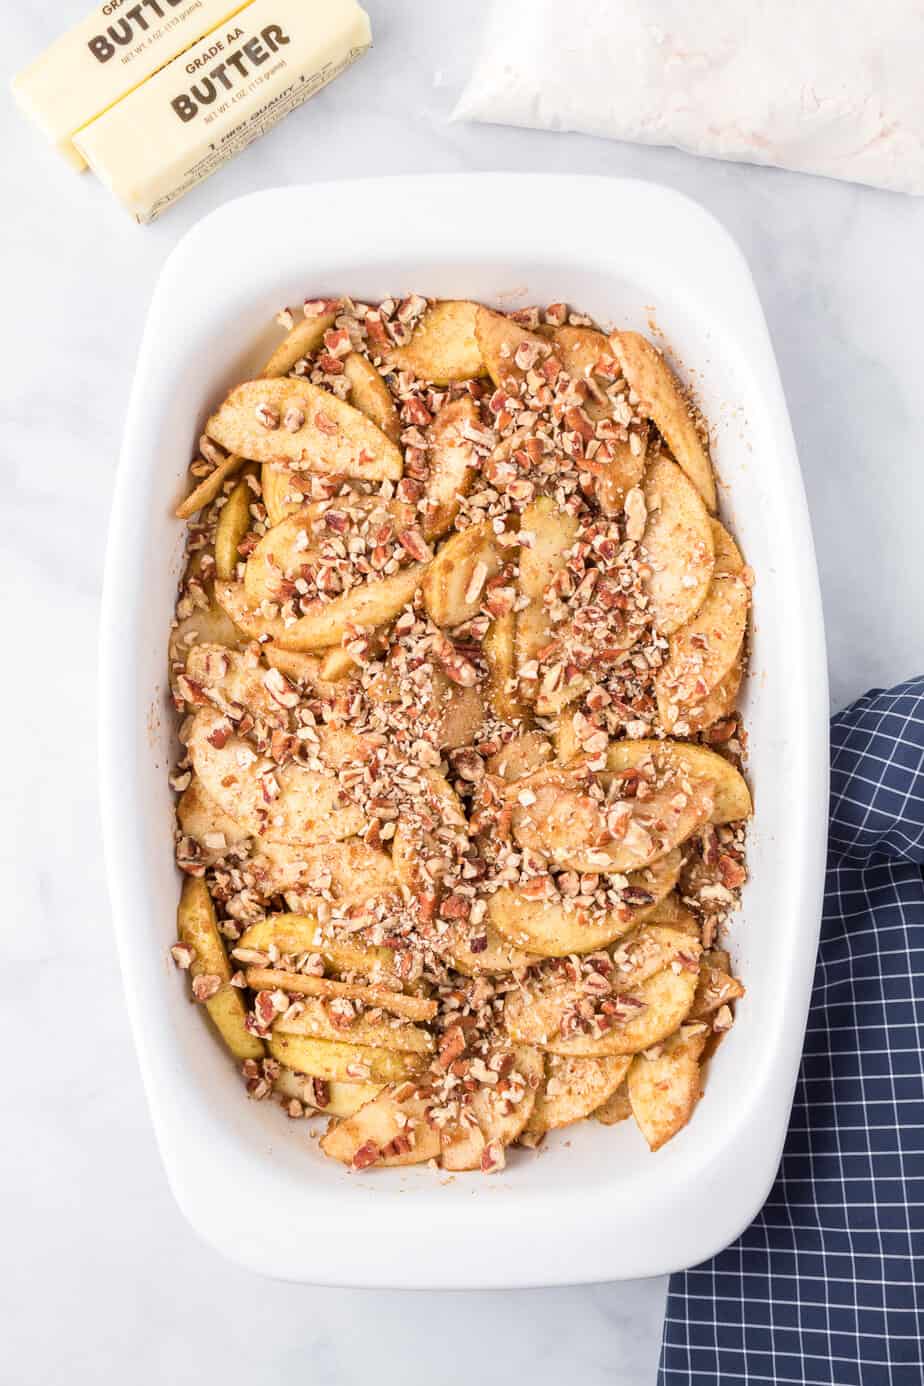 Apple slices mixed with cinnamon, sugar and pecans in a baking dish from overhead.